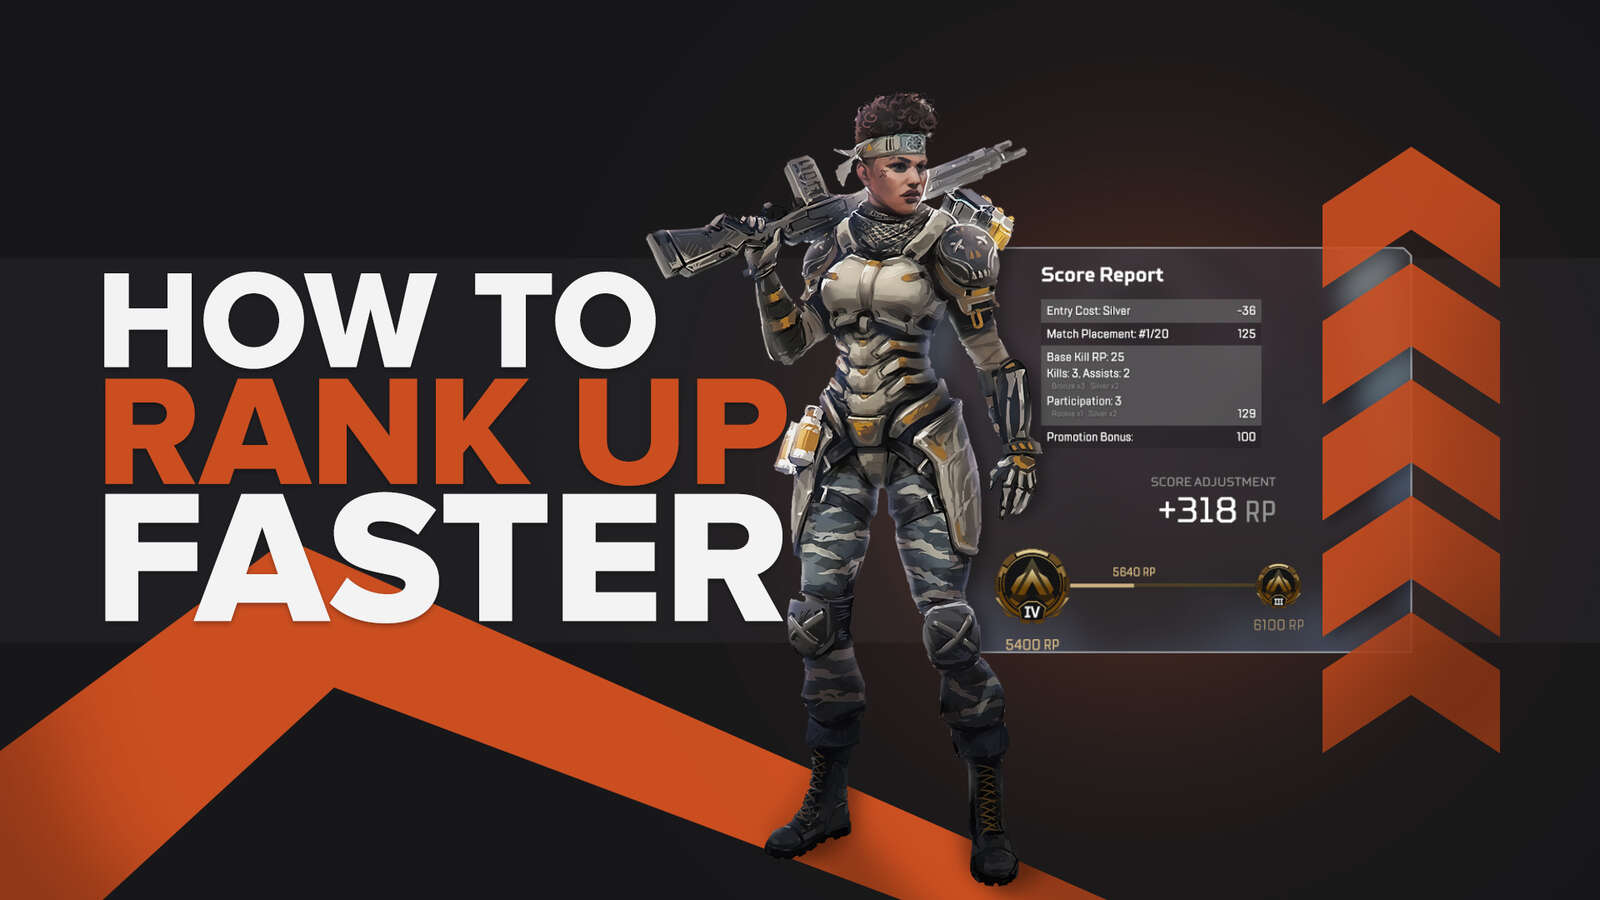 The best tips so you can rank up faster in Apex Legends!